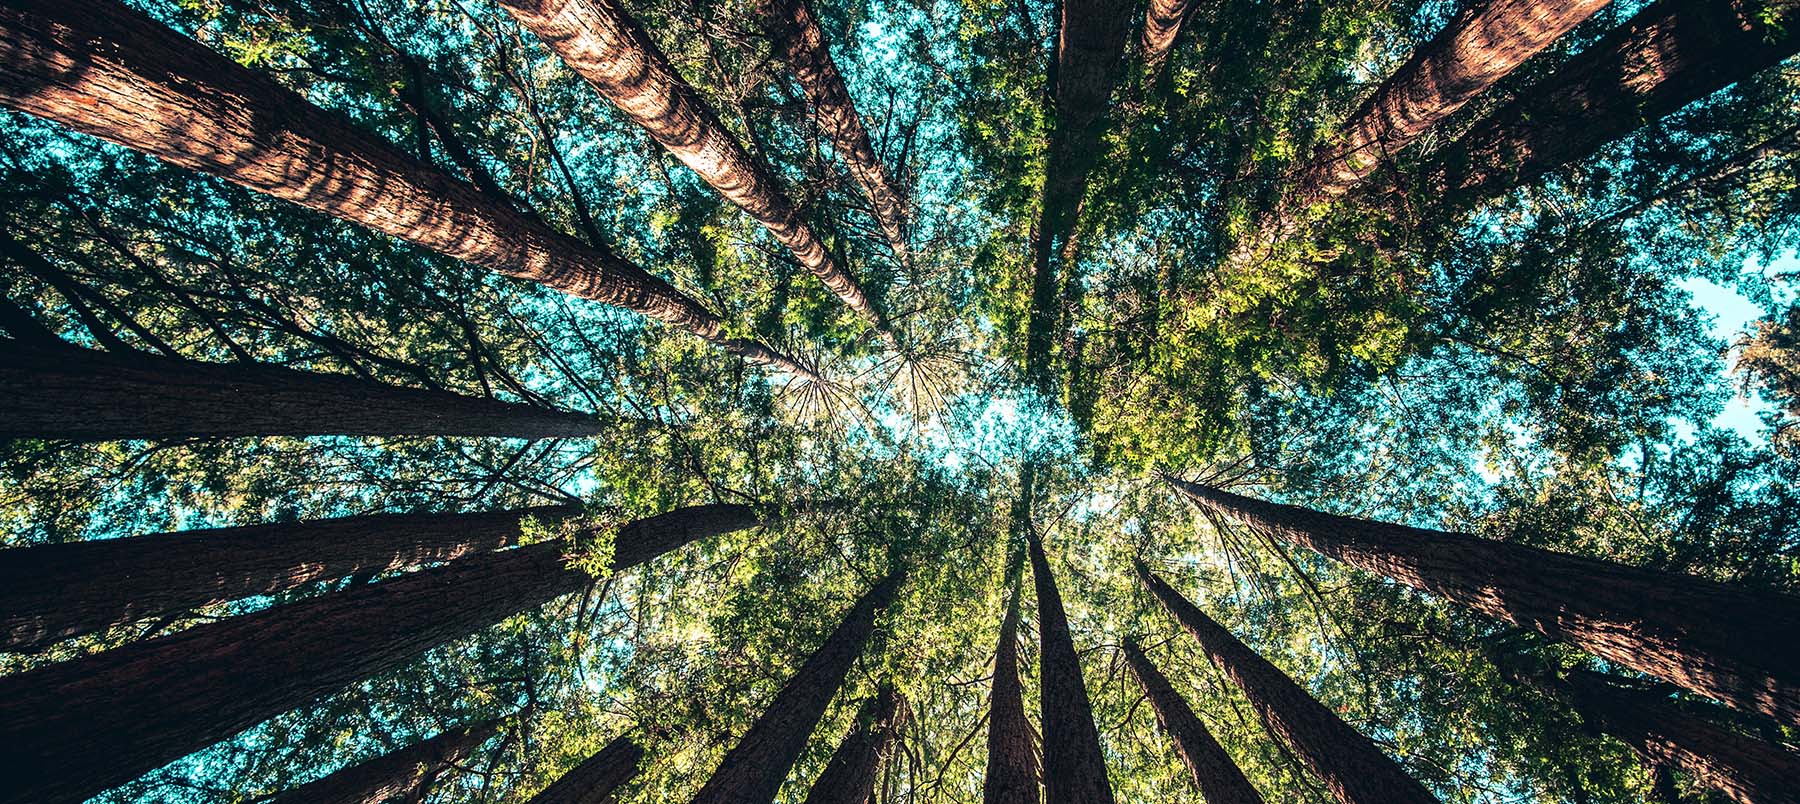 Shot upwards, looking up the trunks of a circle of trees at the sky 